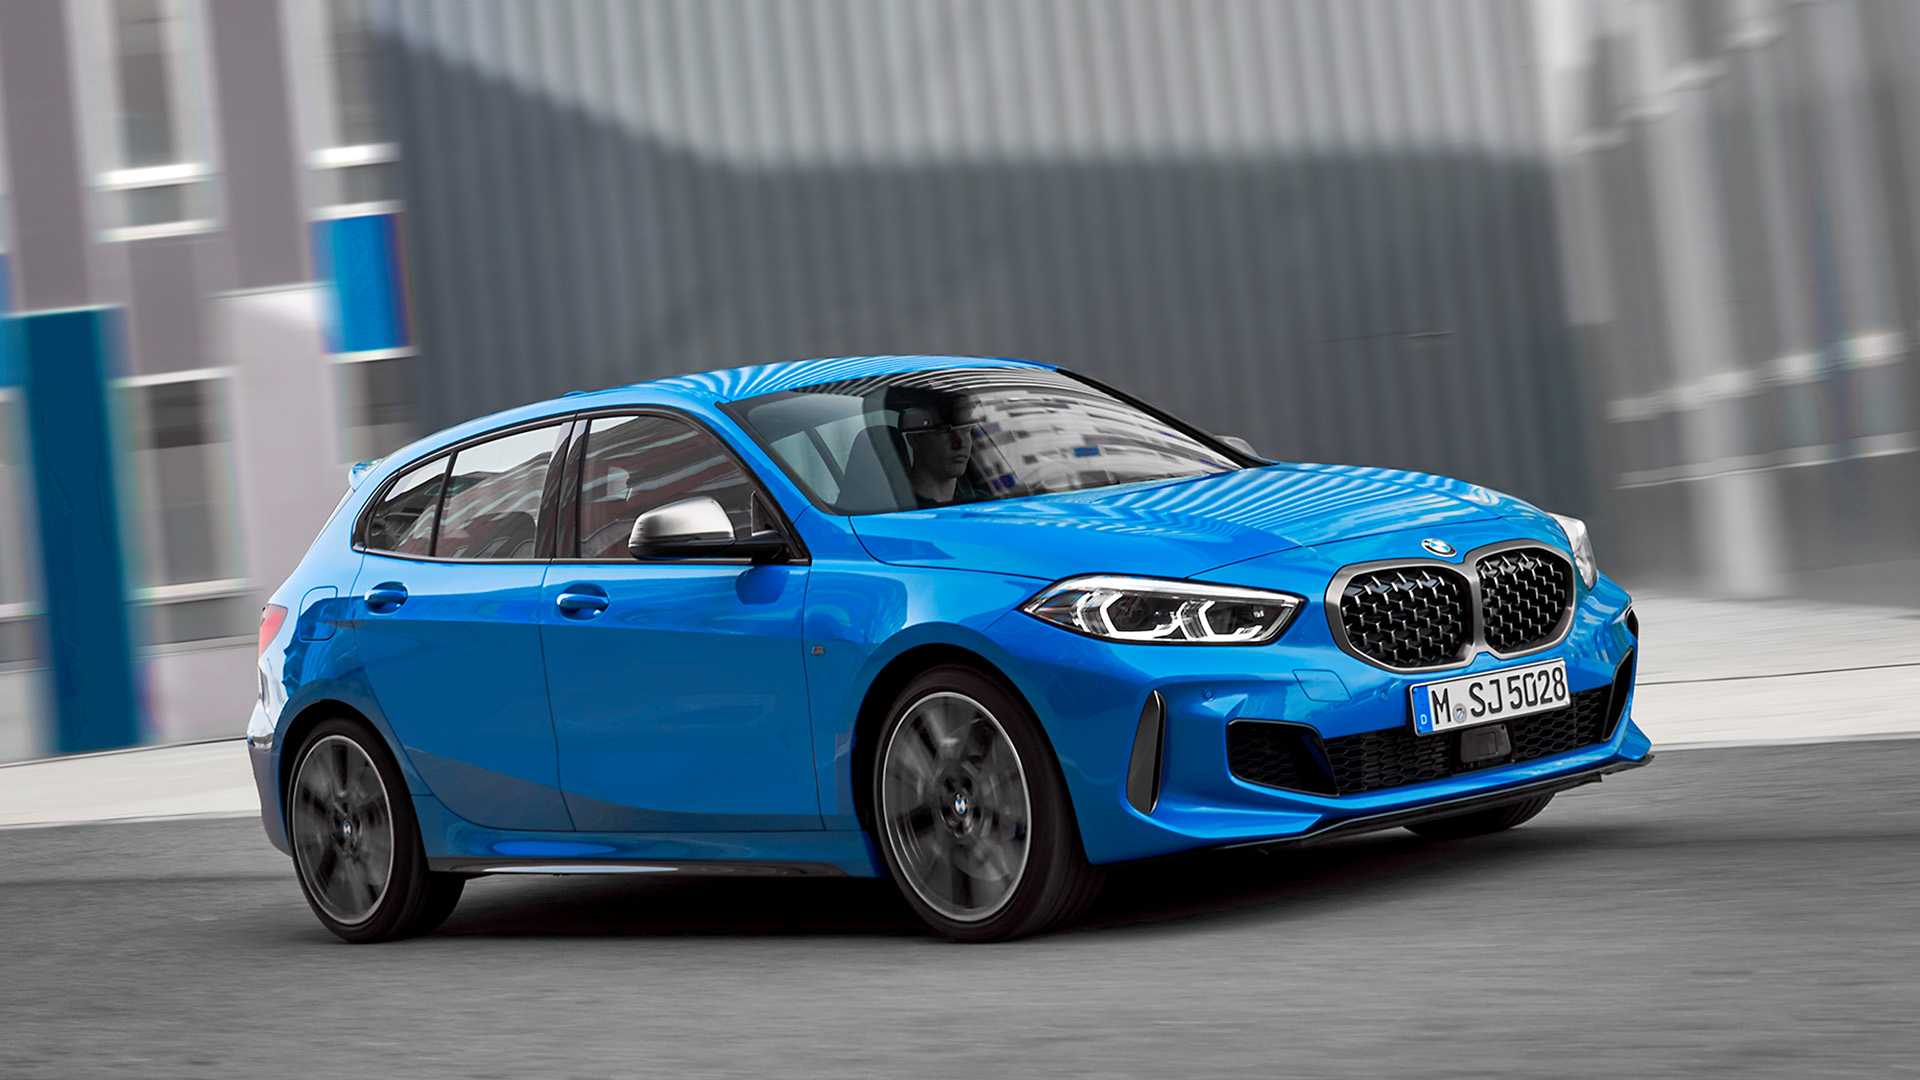 2020 BMW 1 Series Hatchback Debuts With 2.0-liter Turbo Engine In M135i ...